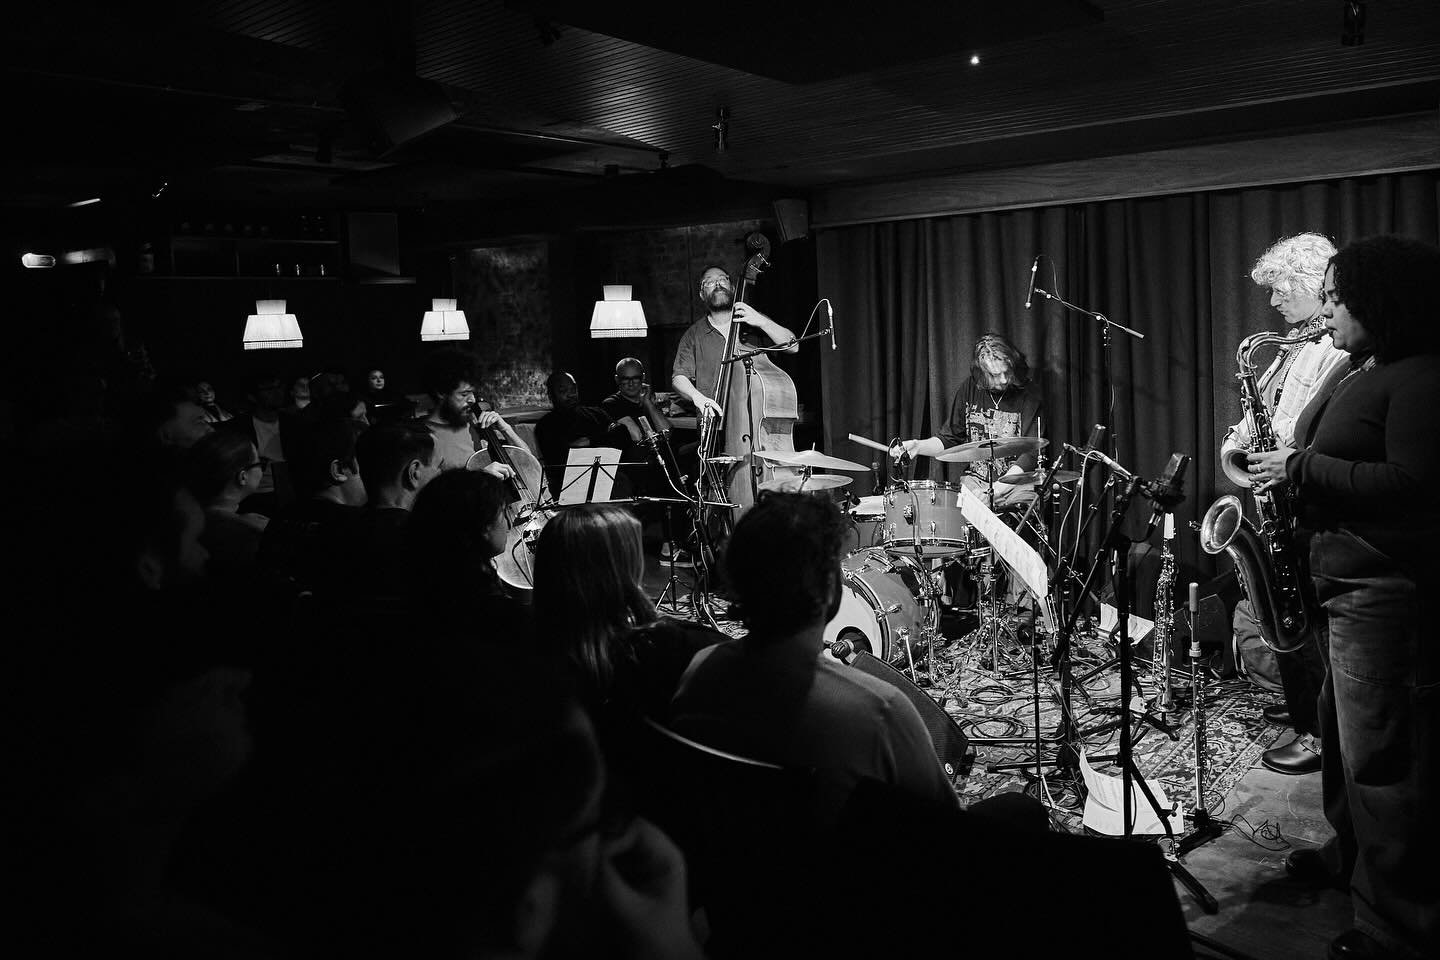 Last Monday in London, @tomskinnermusic and his Voices of Bishara ensemble returned to the scene of the crime @mu.ldn to celebrate the release of their new Live LP. Some nice captures here c/o @andrebaumecker .